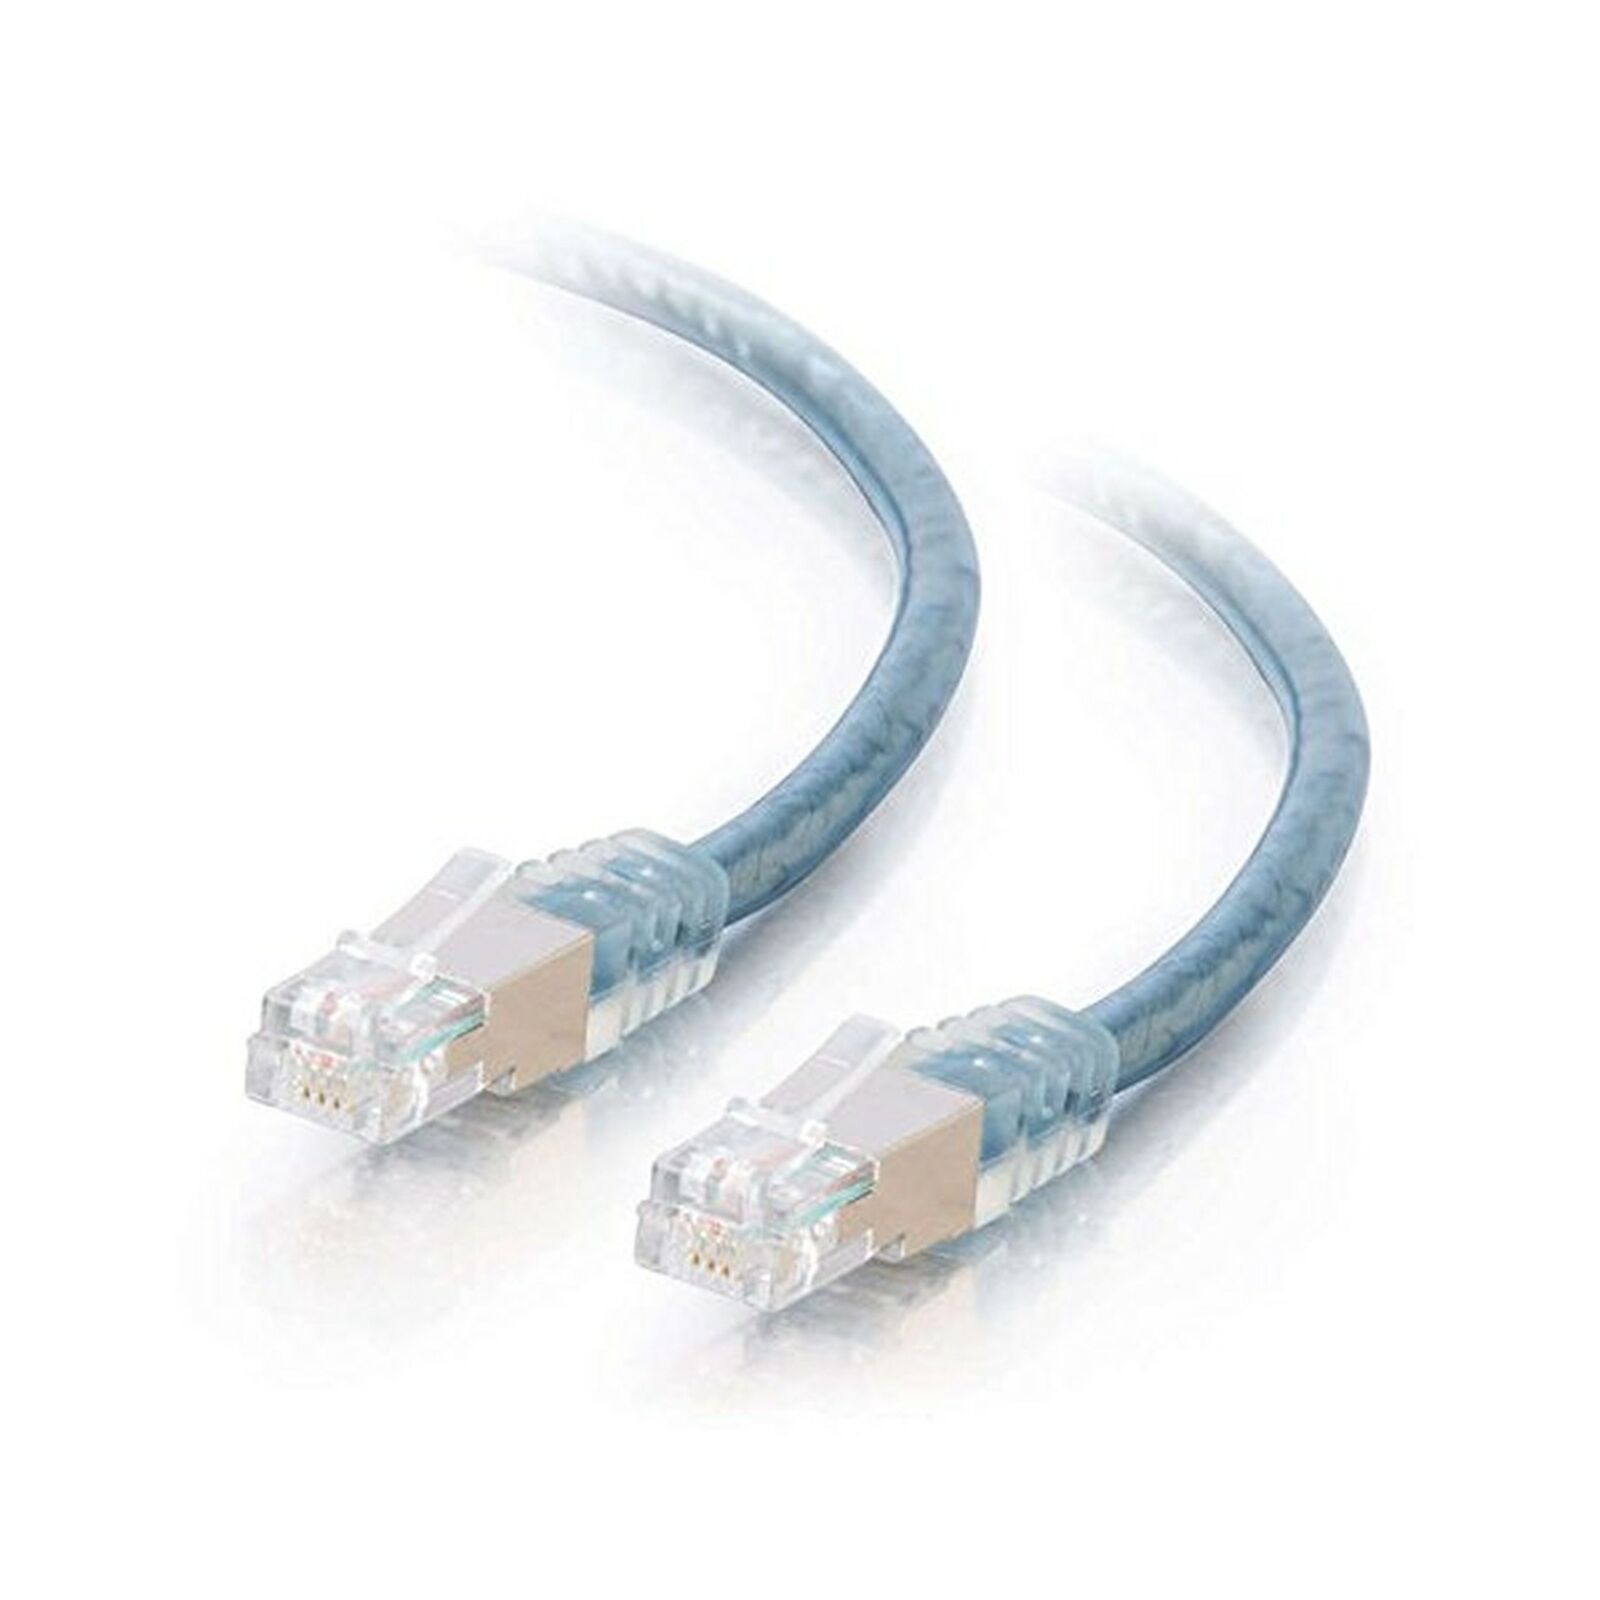 C2G RJ11 Modem Cable For DSL Internet - Connects Phone Jack To Broadband DSL ...